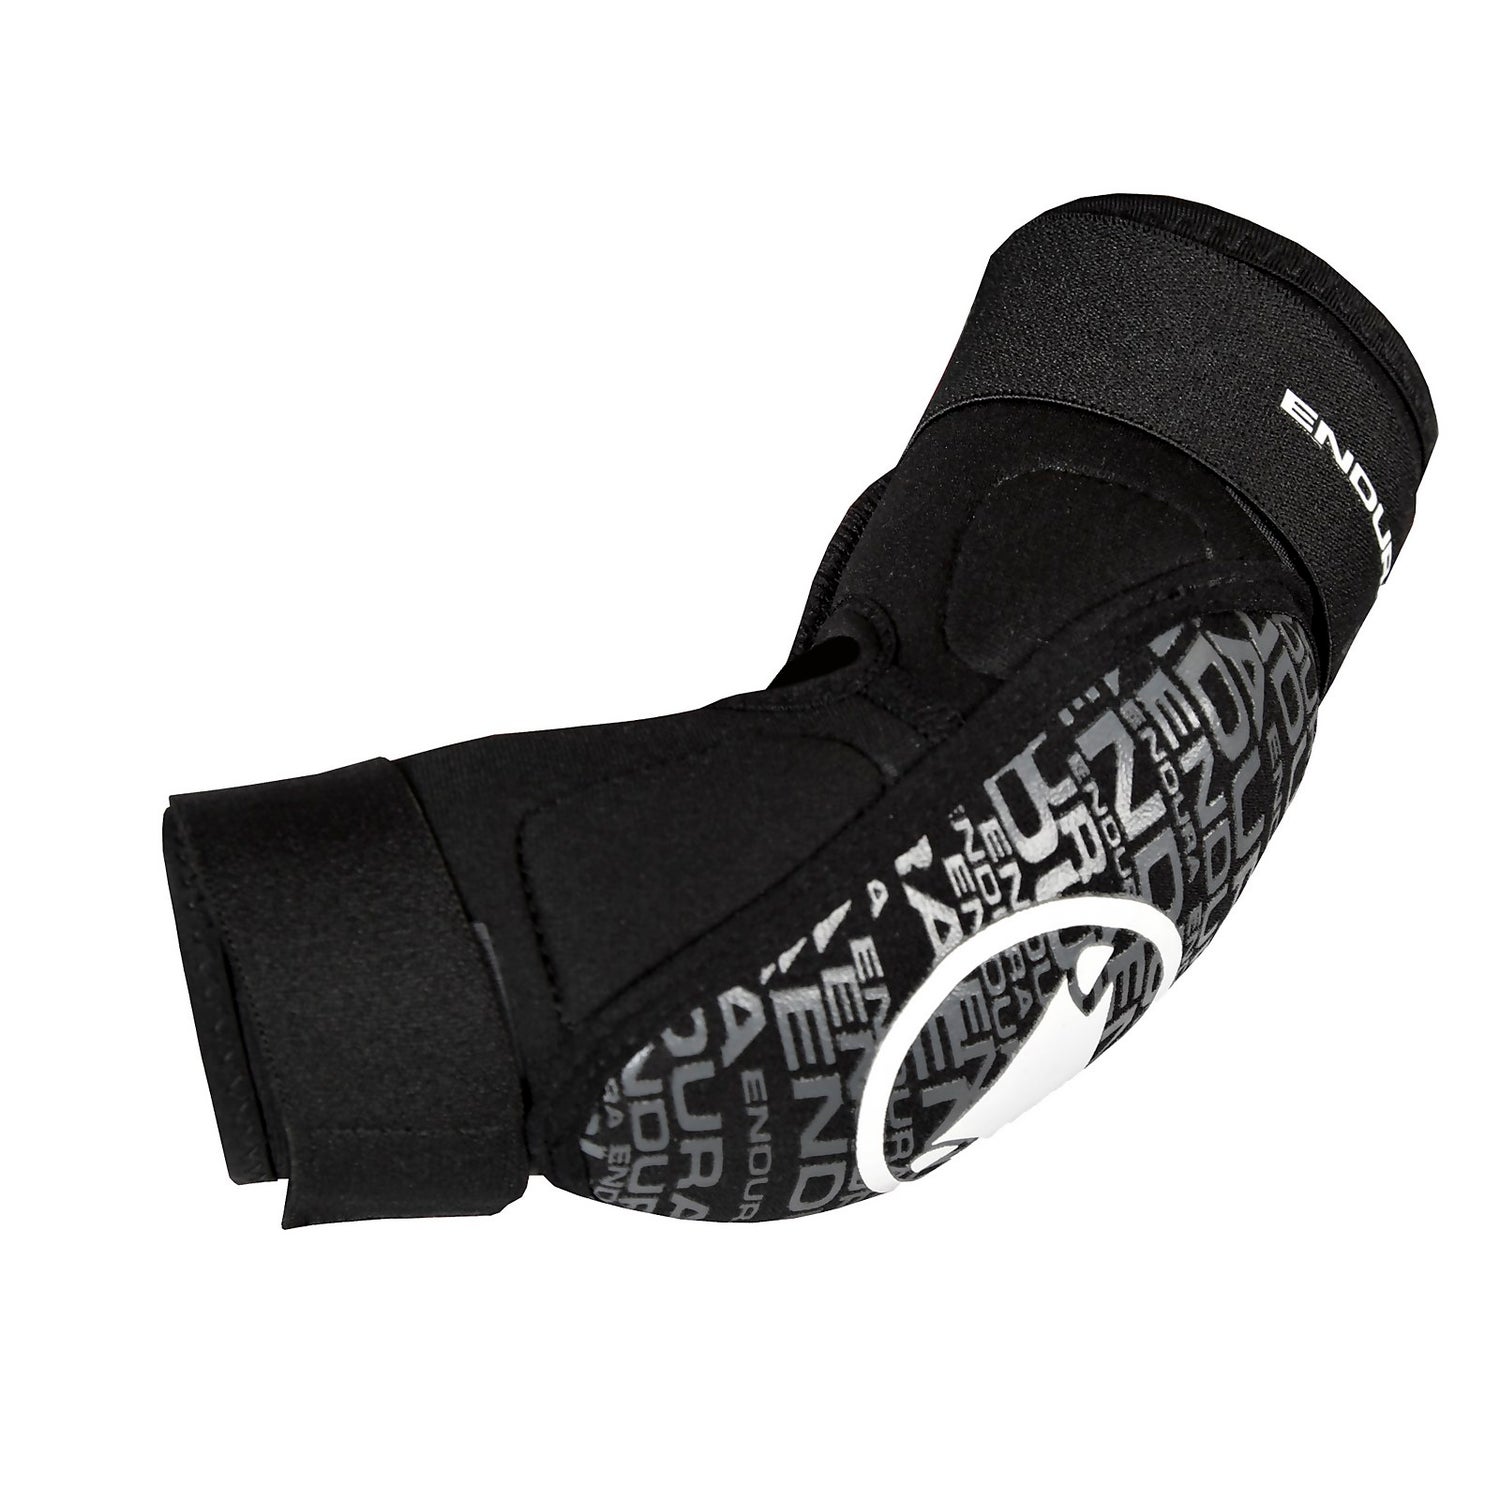 SingleTrack Youth Elbow Pads - Black - 9-10yrs